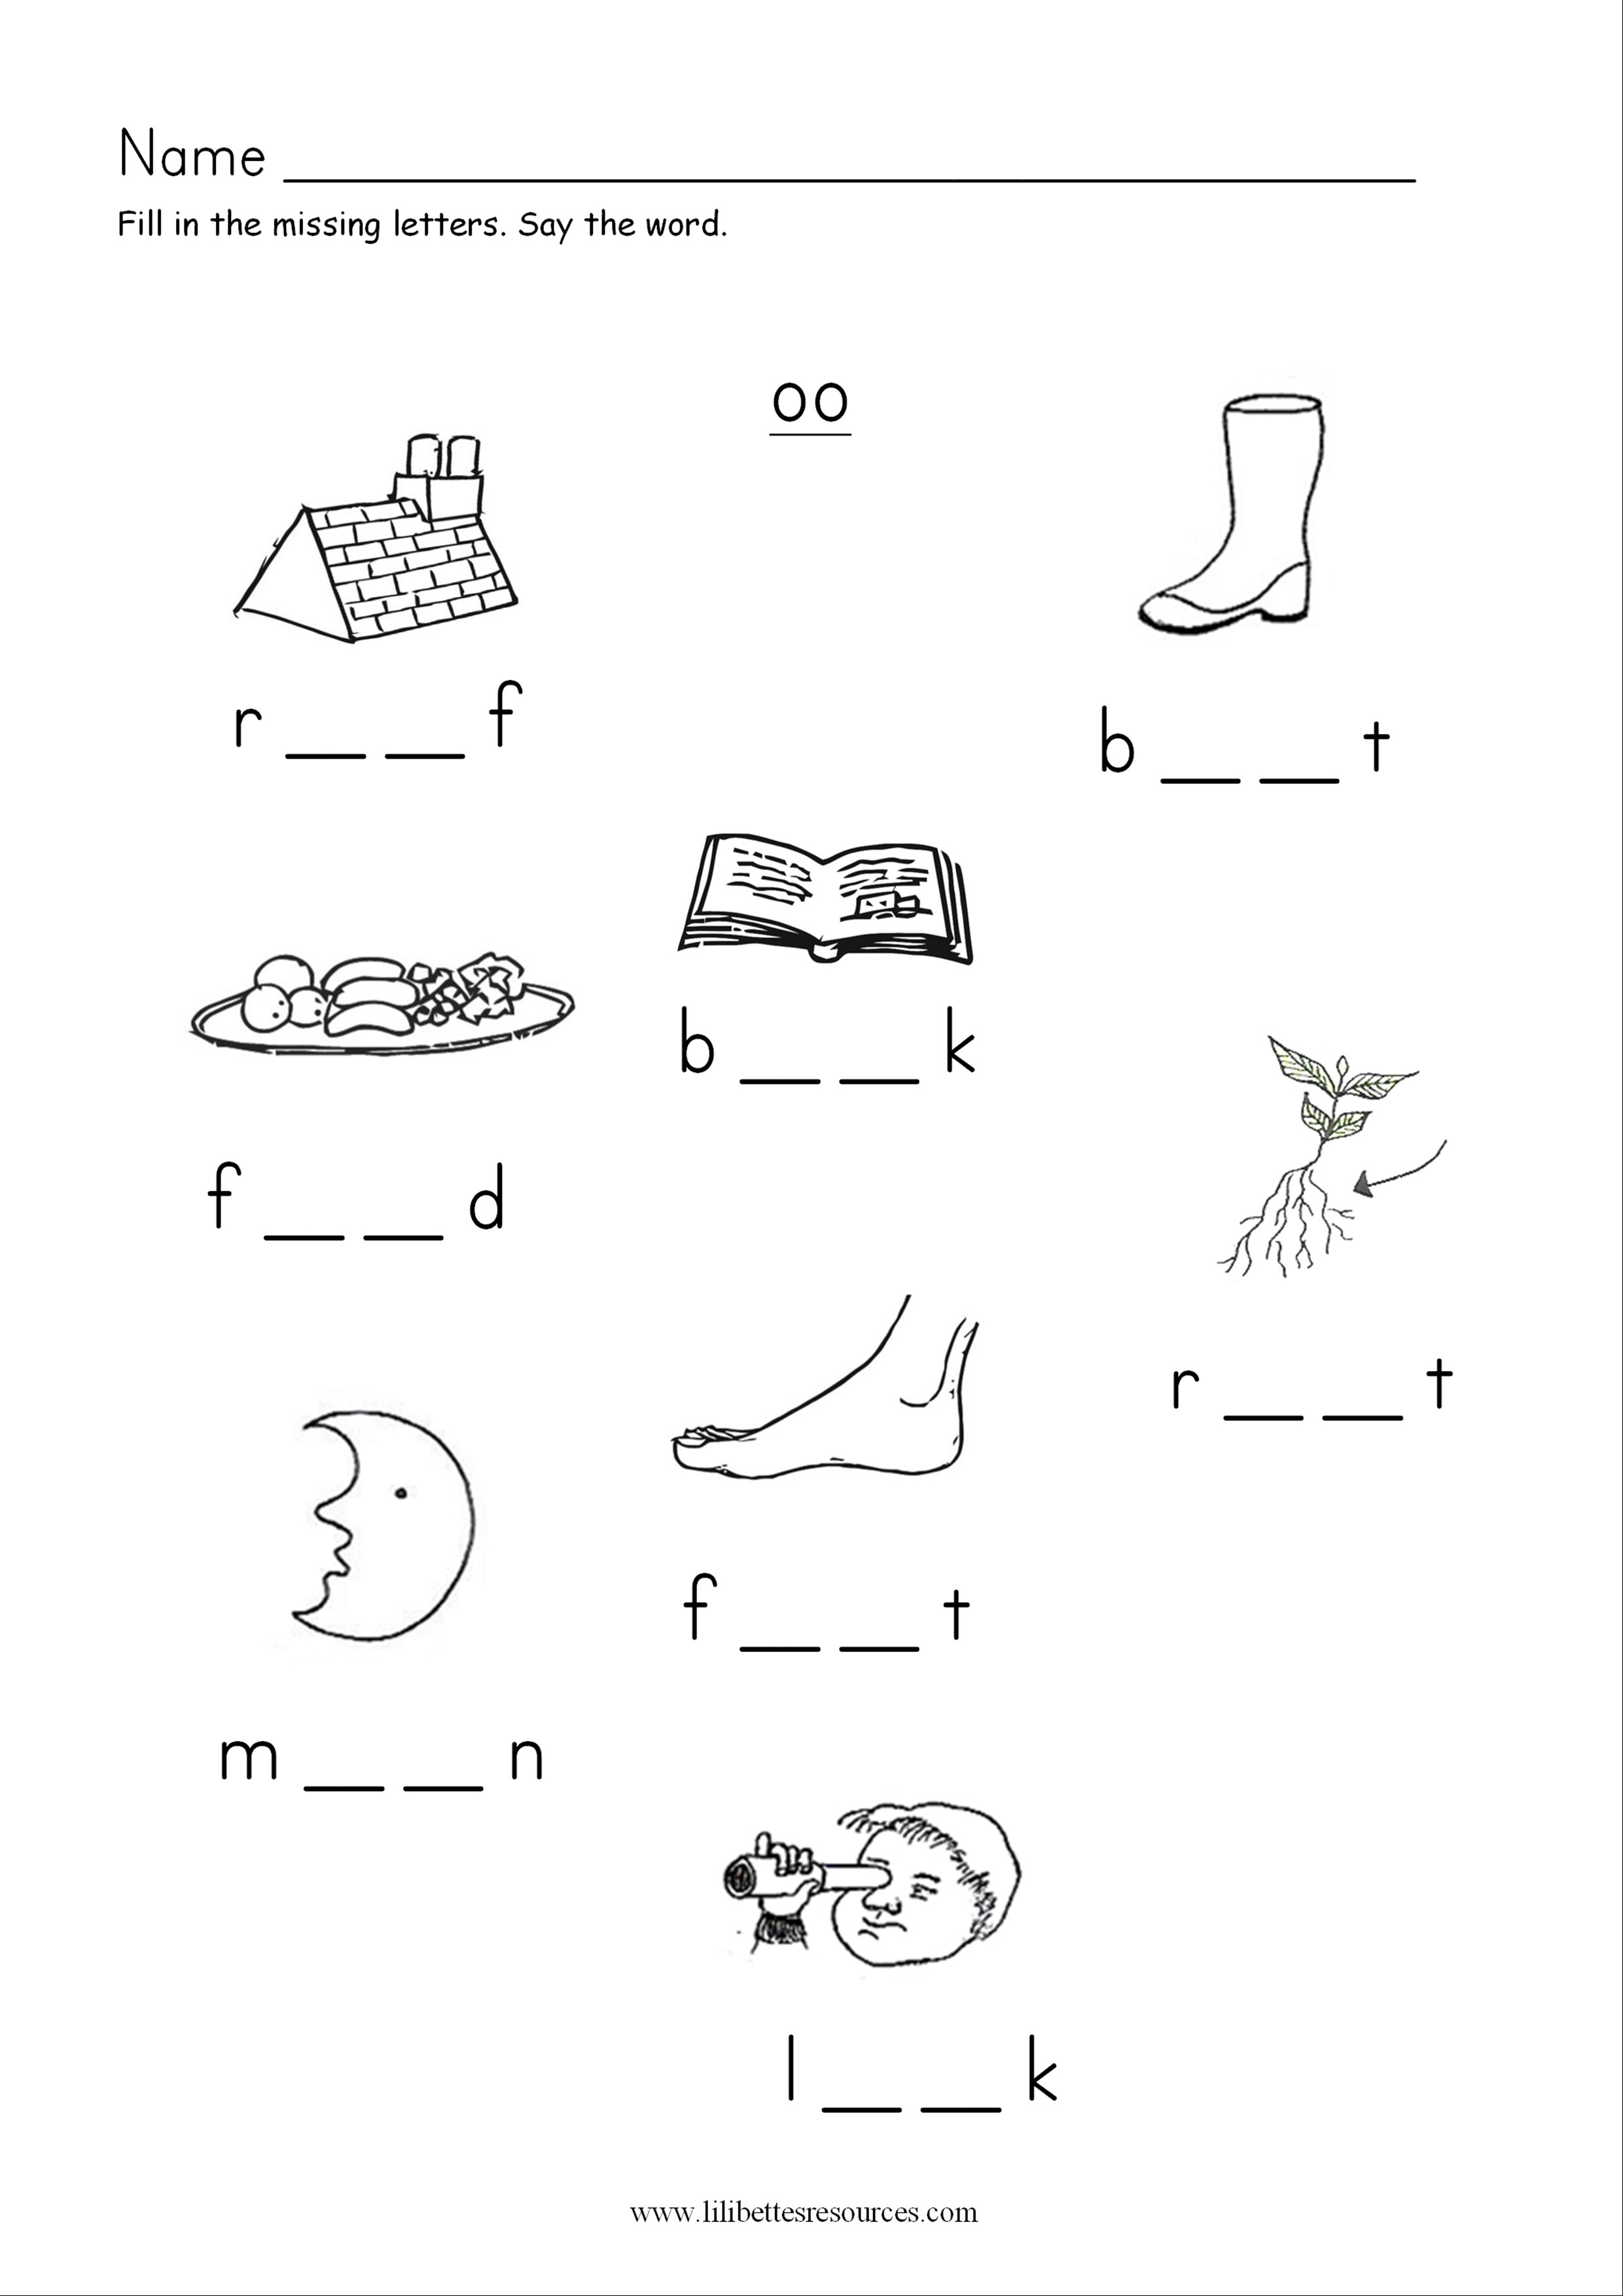 oo-worksheets-sound-it-out-phonics